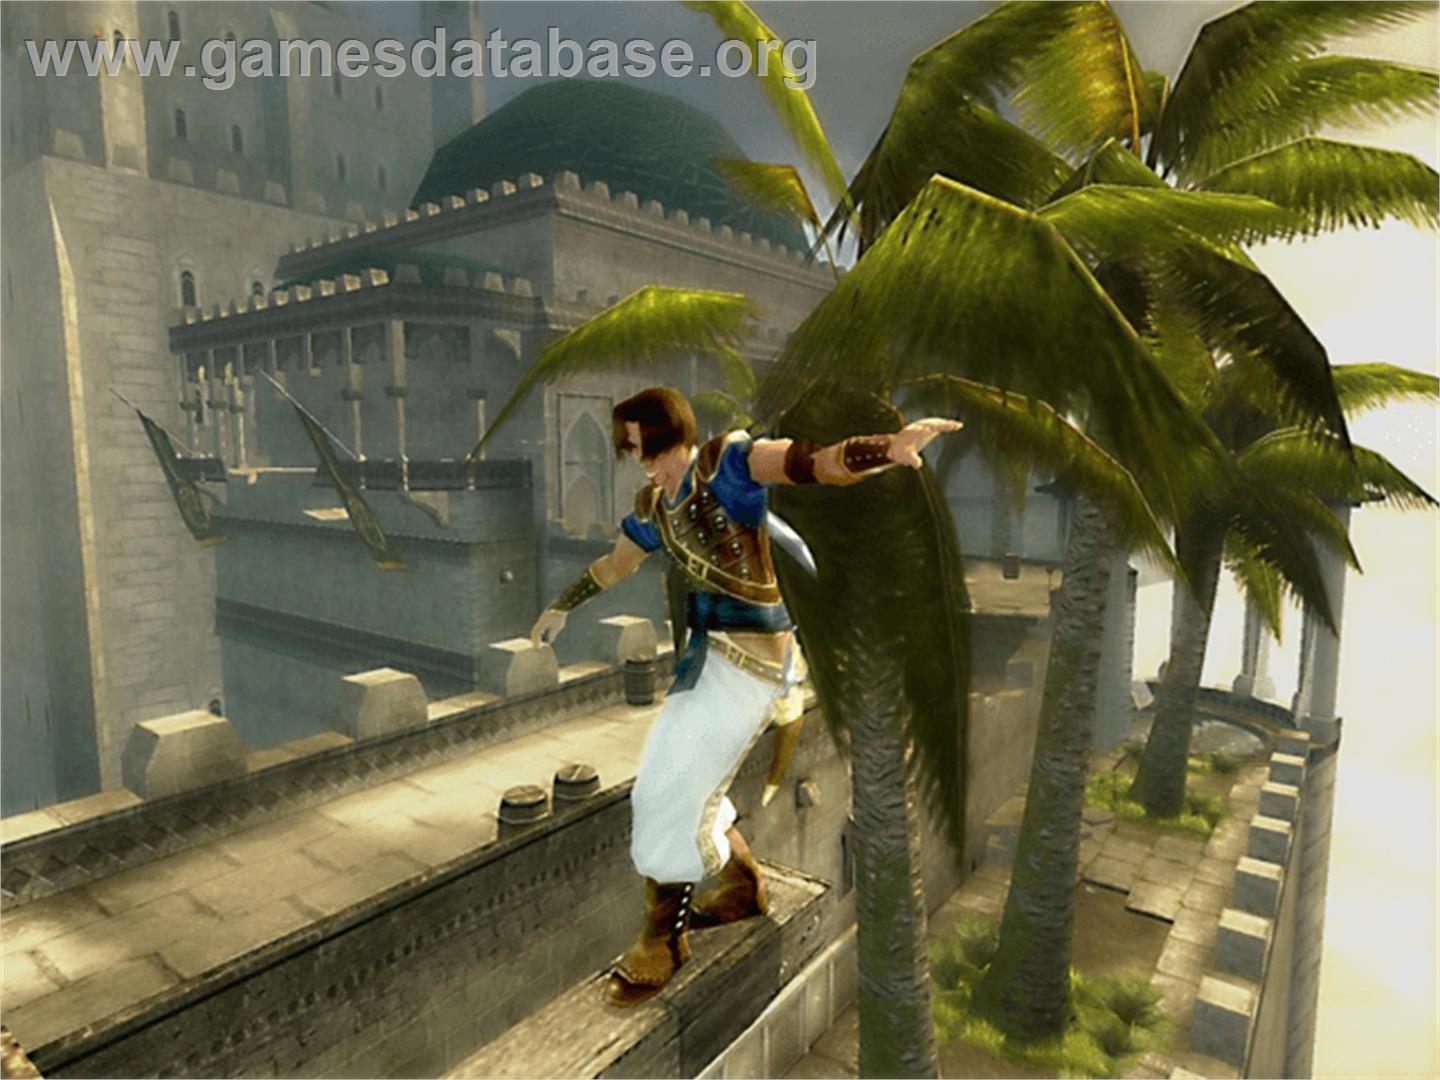 Prince of Persia: The Sands of Time - Microsoft Xbox - Artwork - In Game